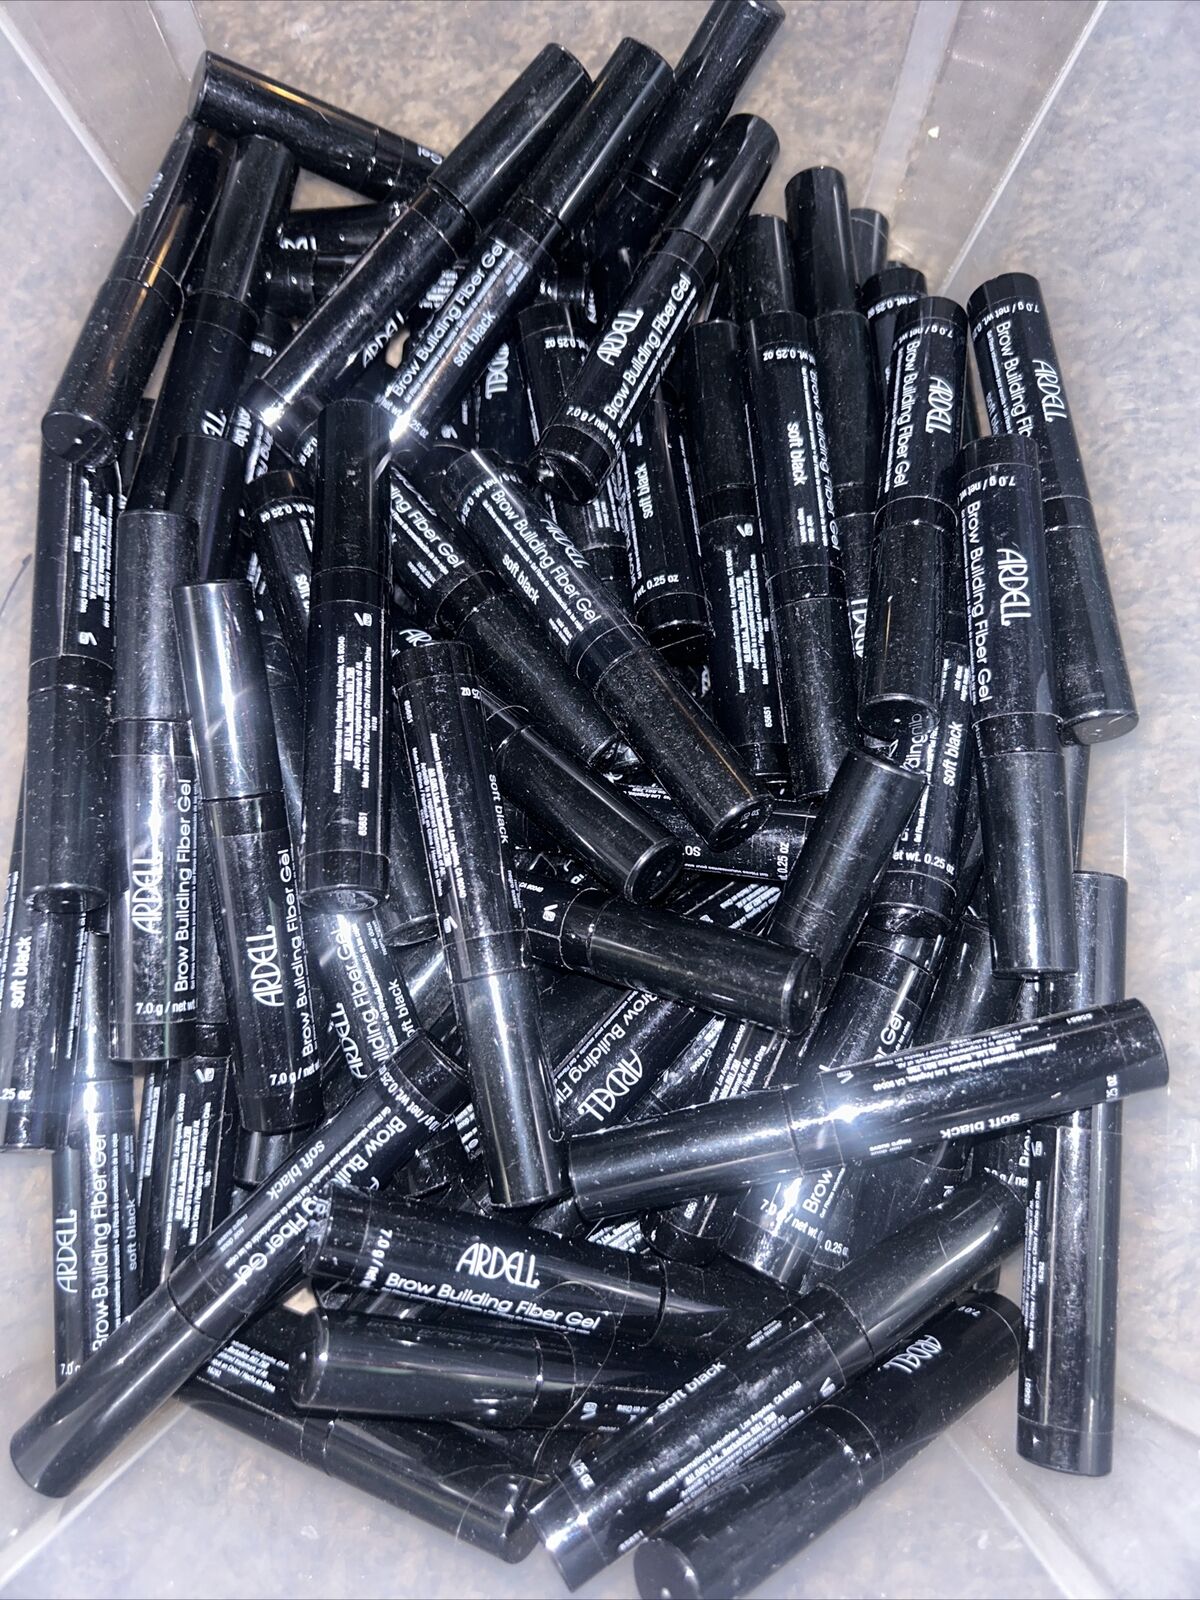 50pc Lot- ARDELL  BROW BUILDING FIBER GEL SOFT BLACK full size - Uncarded